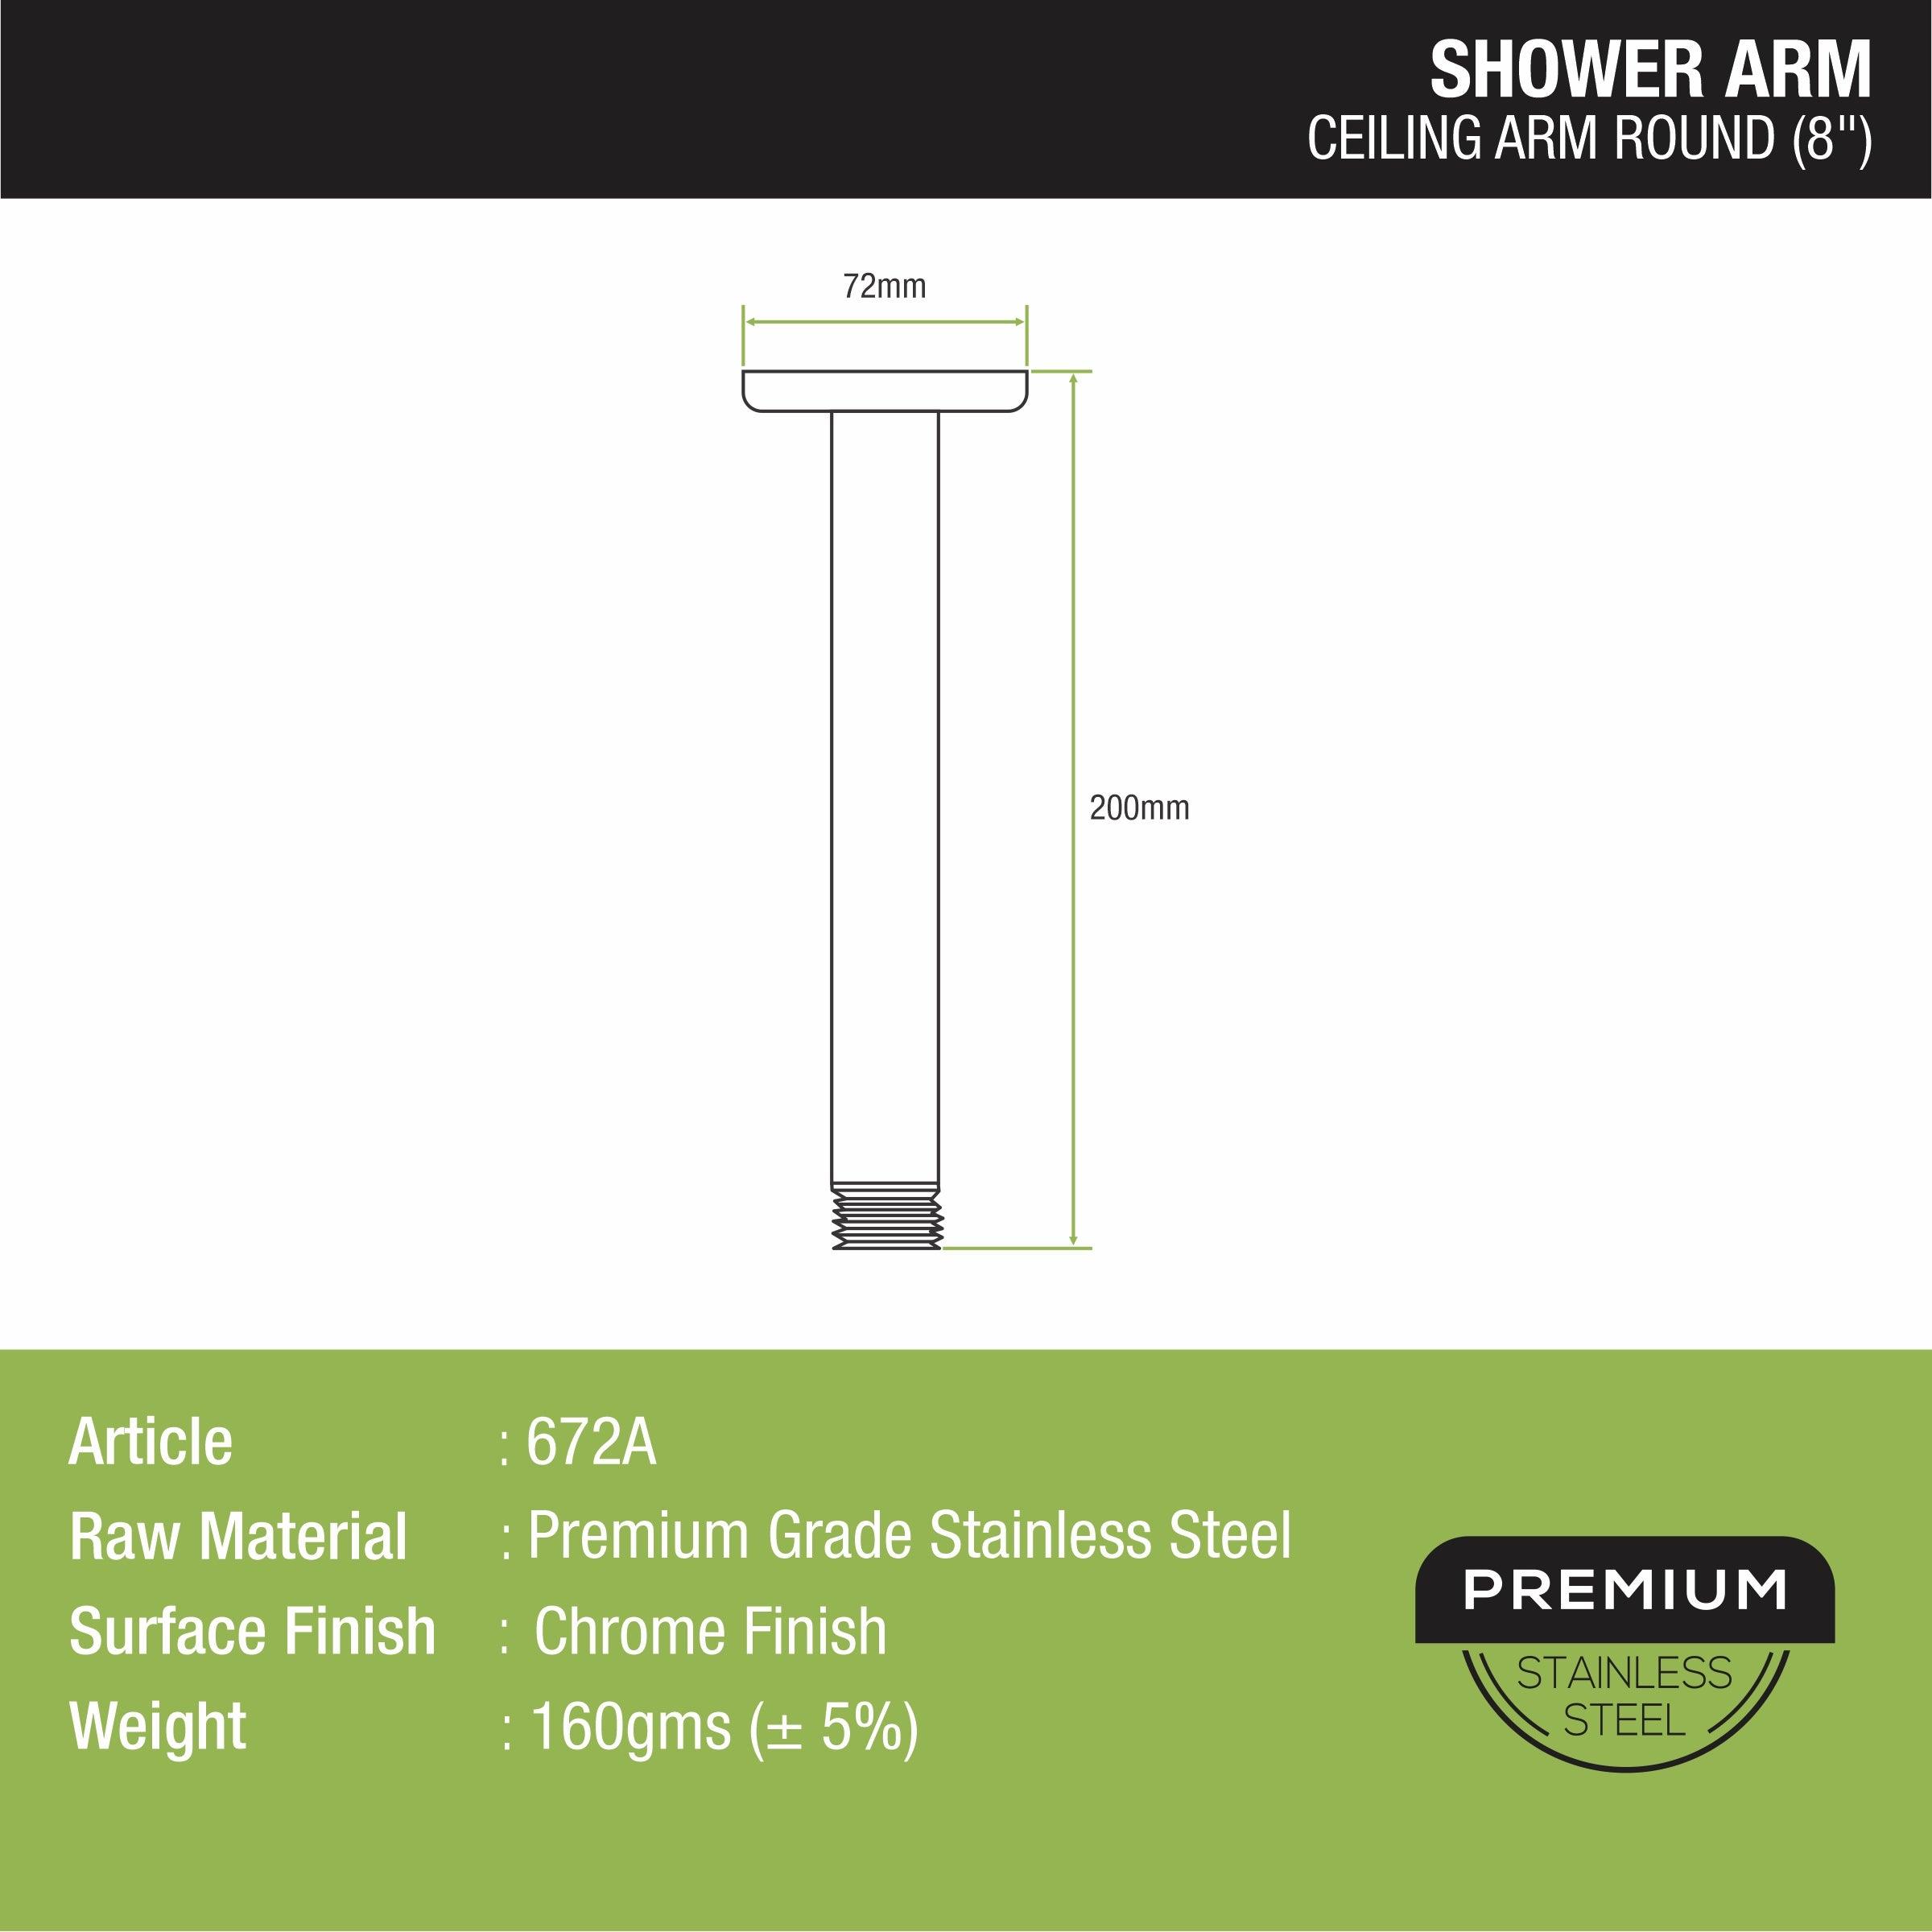 Ceiling Round Shower Arm (8 Inches) sizes and dimensions